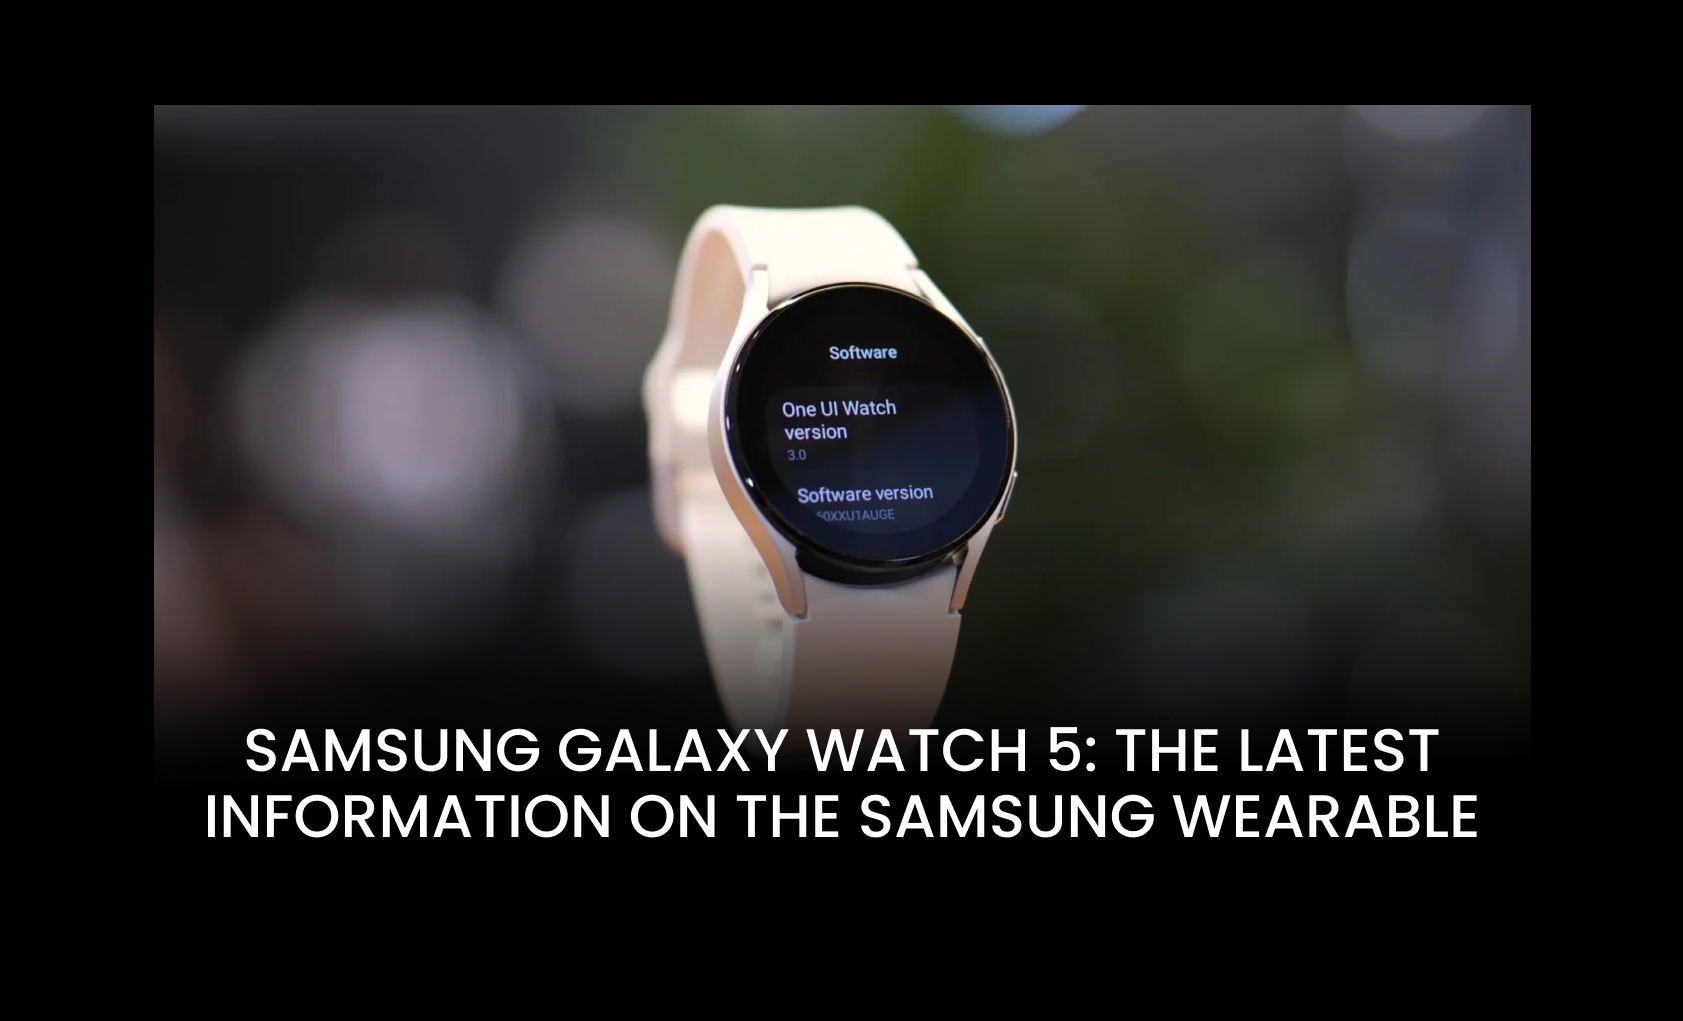 Samsung Galaxy Watch 5: The latest information on the Samsung